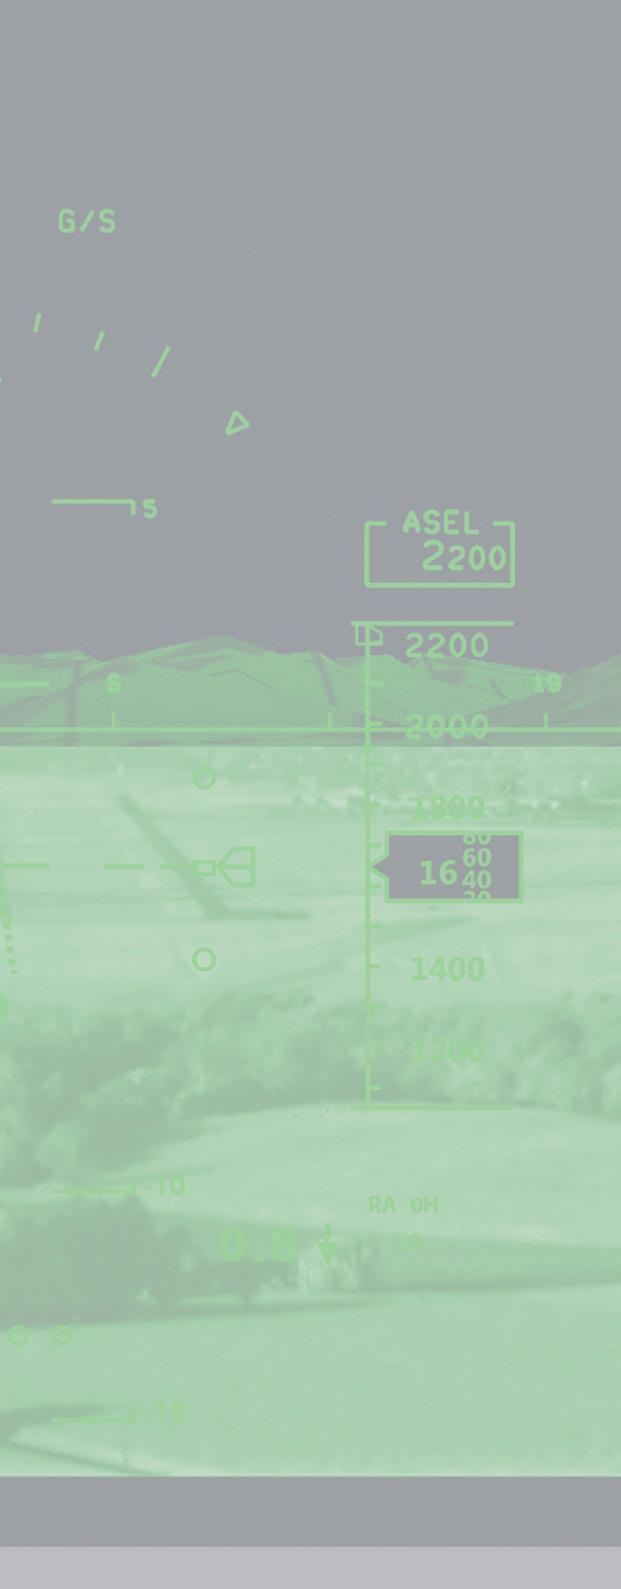 3 4 Synthetic Vision System Head-Up Display Terrain and Obstacle Images Overhead-Mounted Digital HUD The ClearVision Synthetic Vision System (SVS) provides synthetic 3D images generated from a